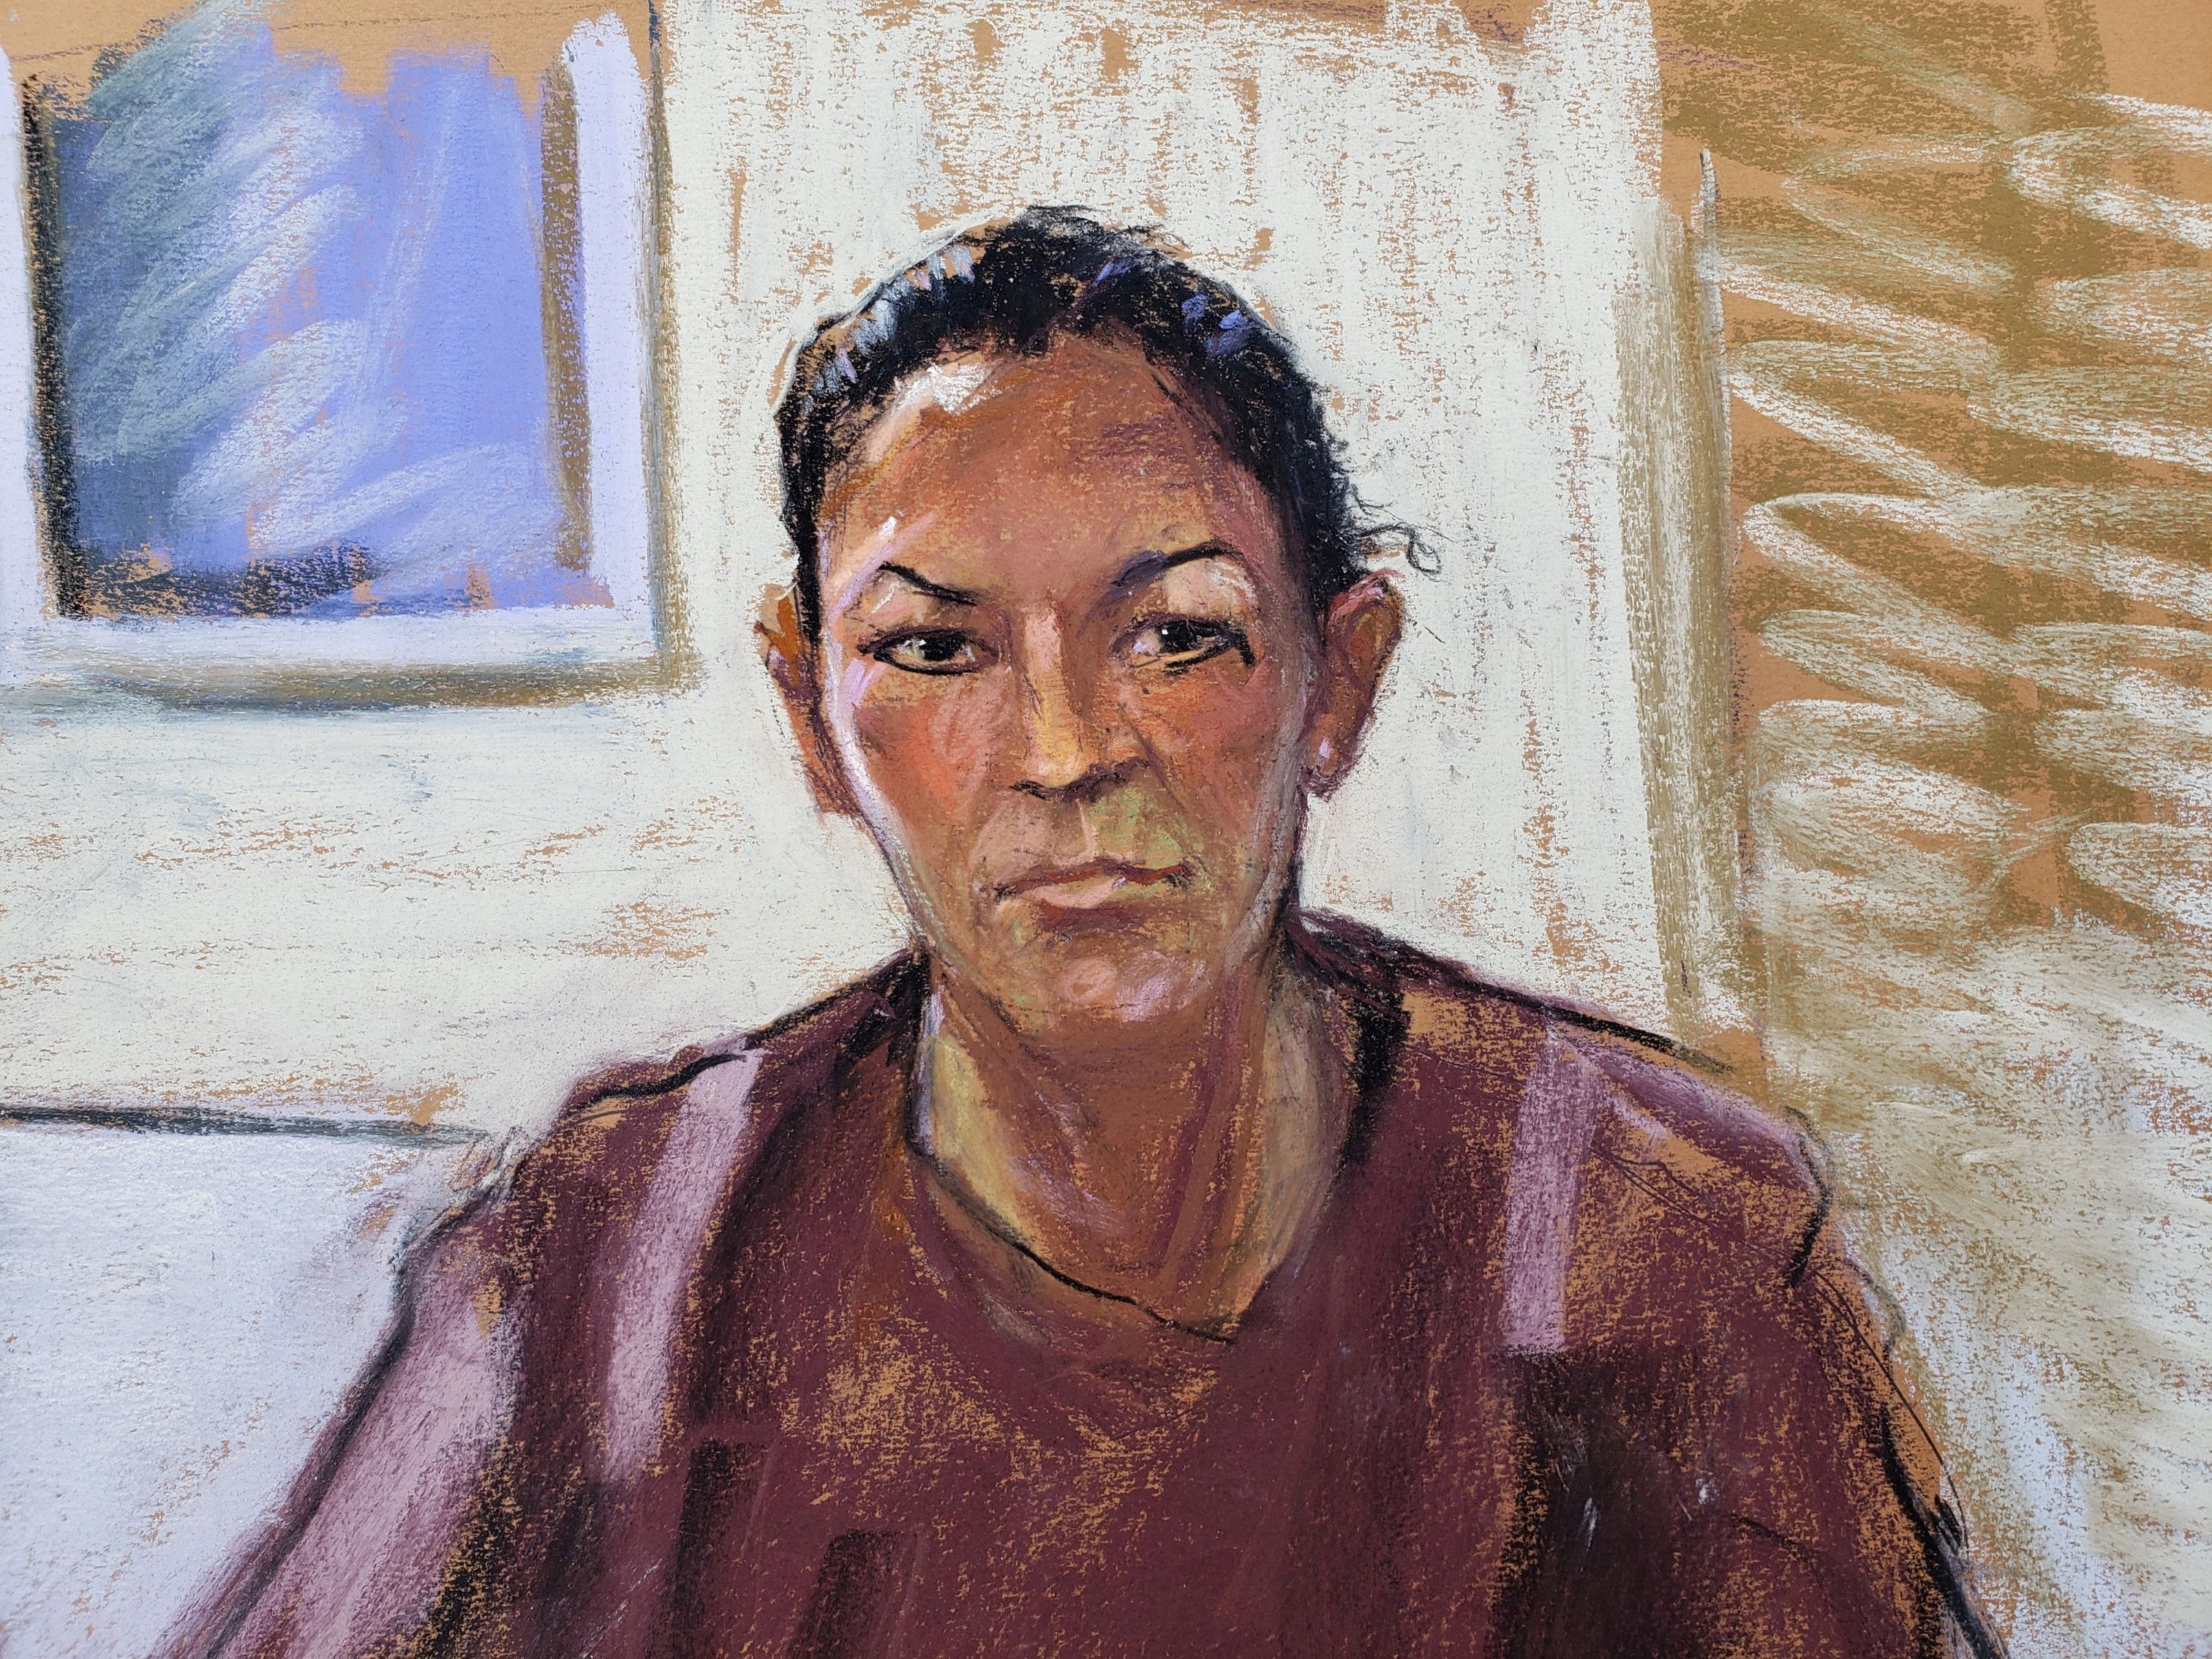 Ghislaine Maxwell appears via video link during her arraignment hearing where she was denied bail for her role aiding Jeffrey Epstein to recruit and eventually abuse of minor girls, in Manhattan Federal Court, in the Manhattan borough of New York City, New York, U.S. July 14, 2020 in this courtroom sketch. REUTERS/Jane Rosenberg/File Photo